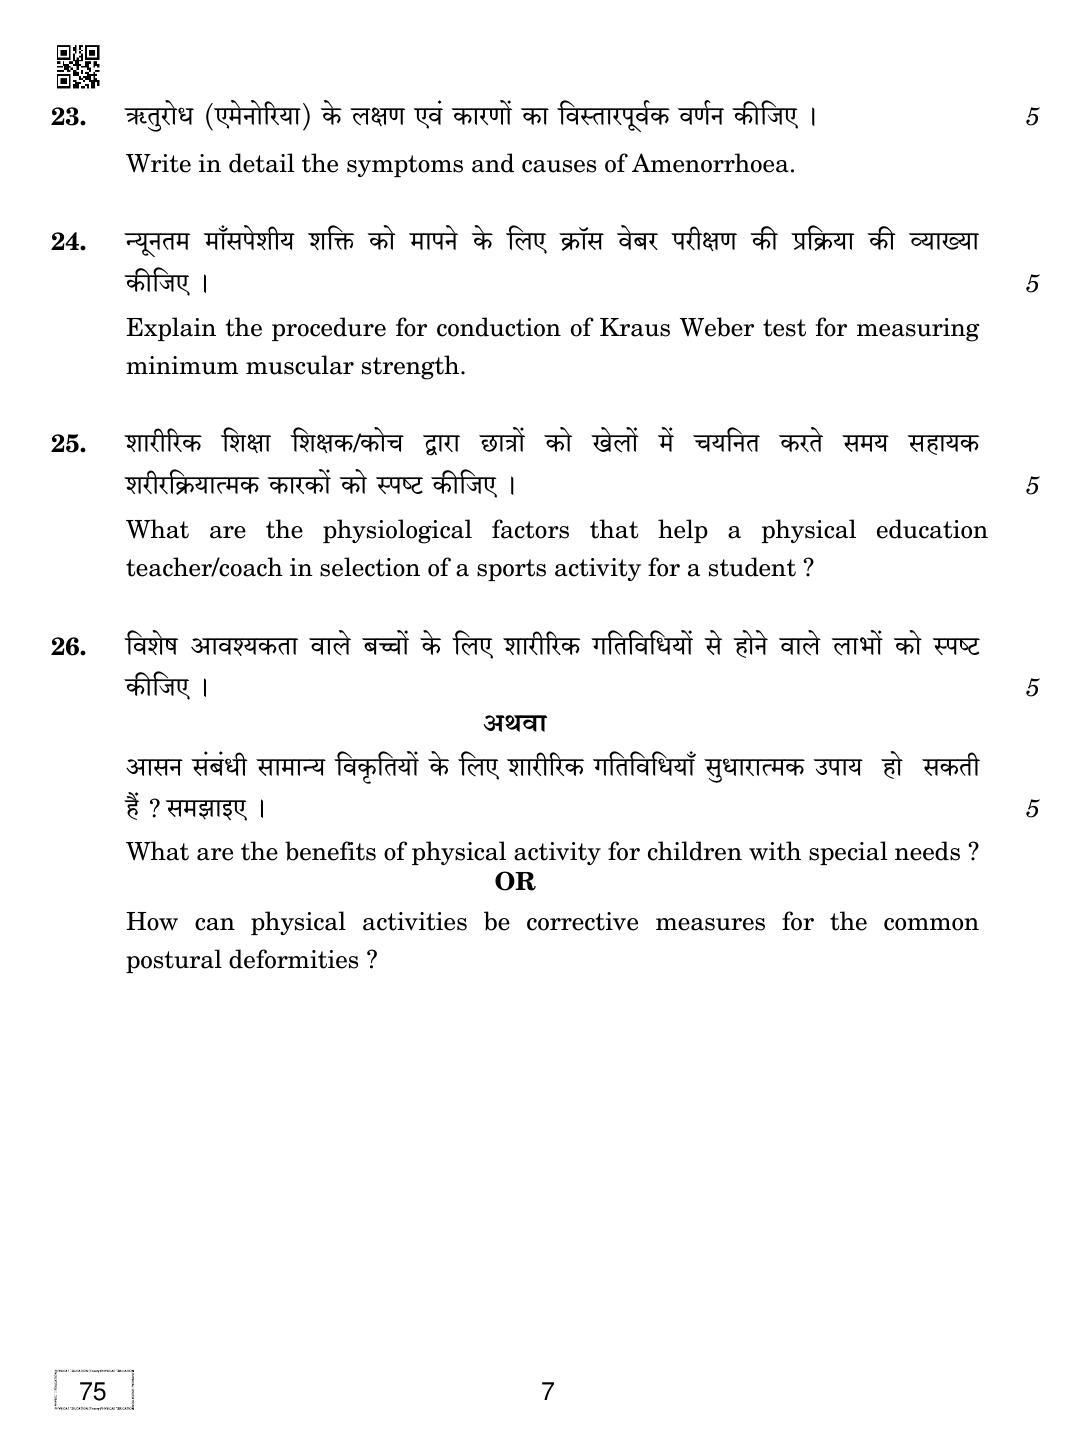 CBSE Class 12 75 PHYSICAL EDUCATION 2019 Compartment Question Paper - Page 7